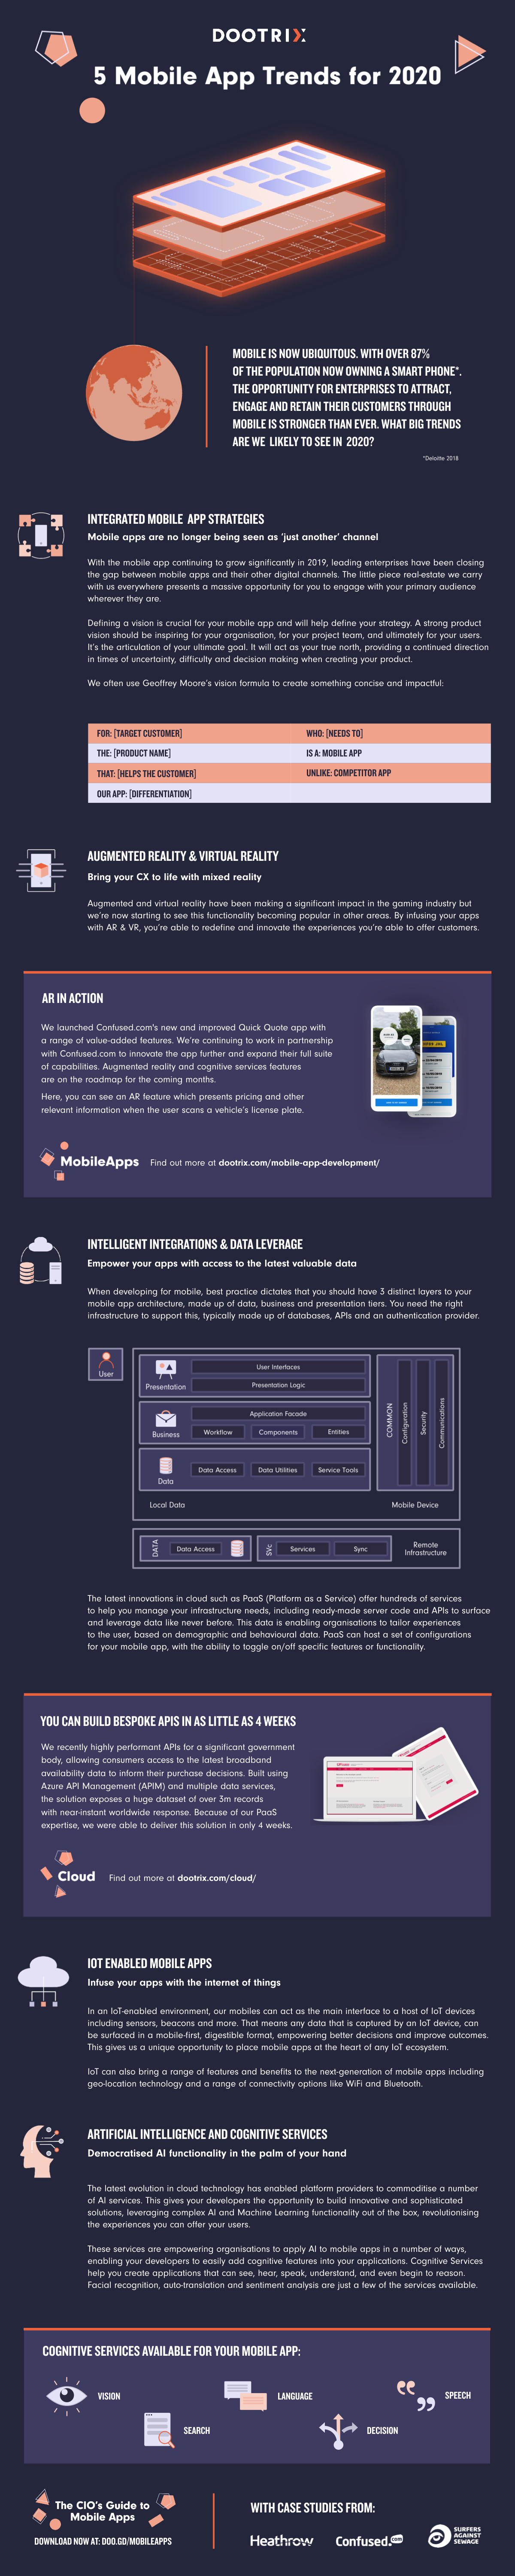 Infographic: 5 Mobile App Trends for 2020